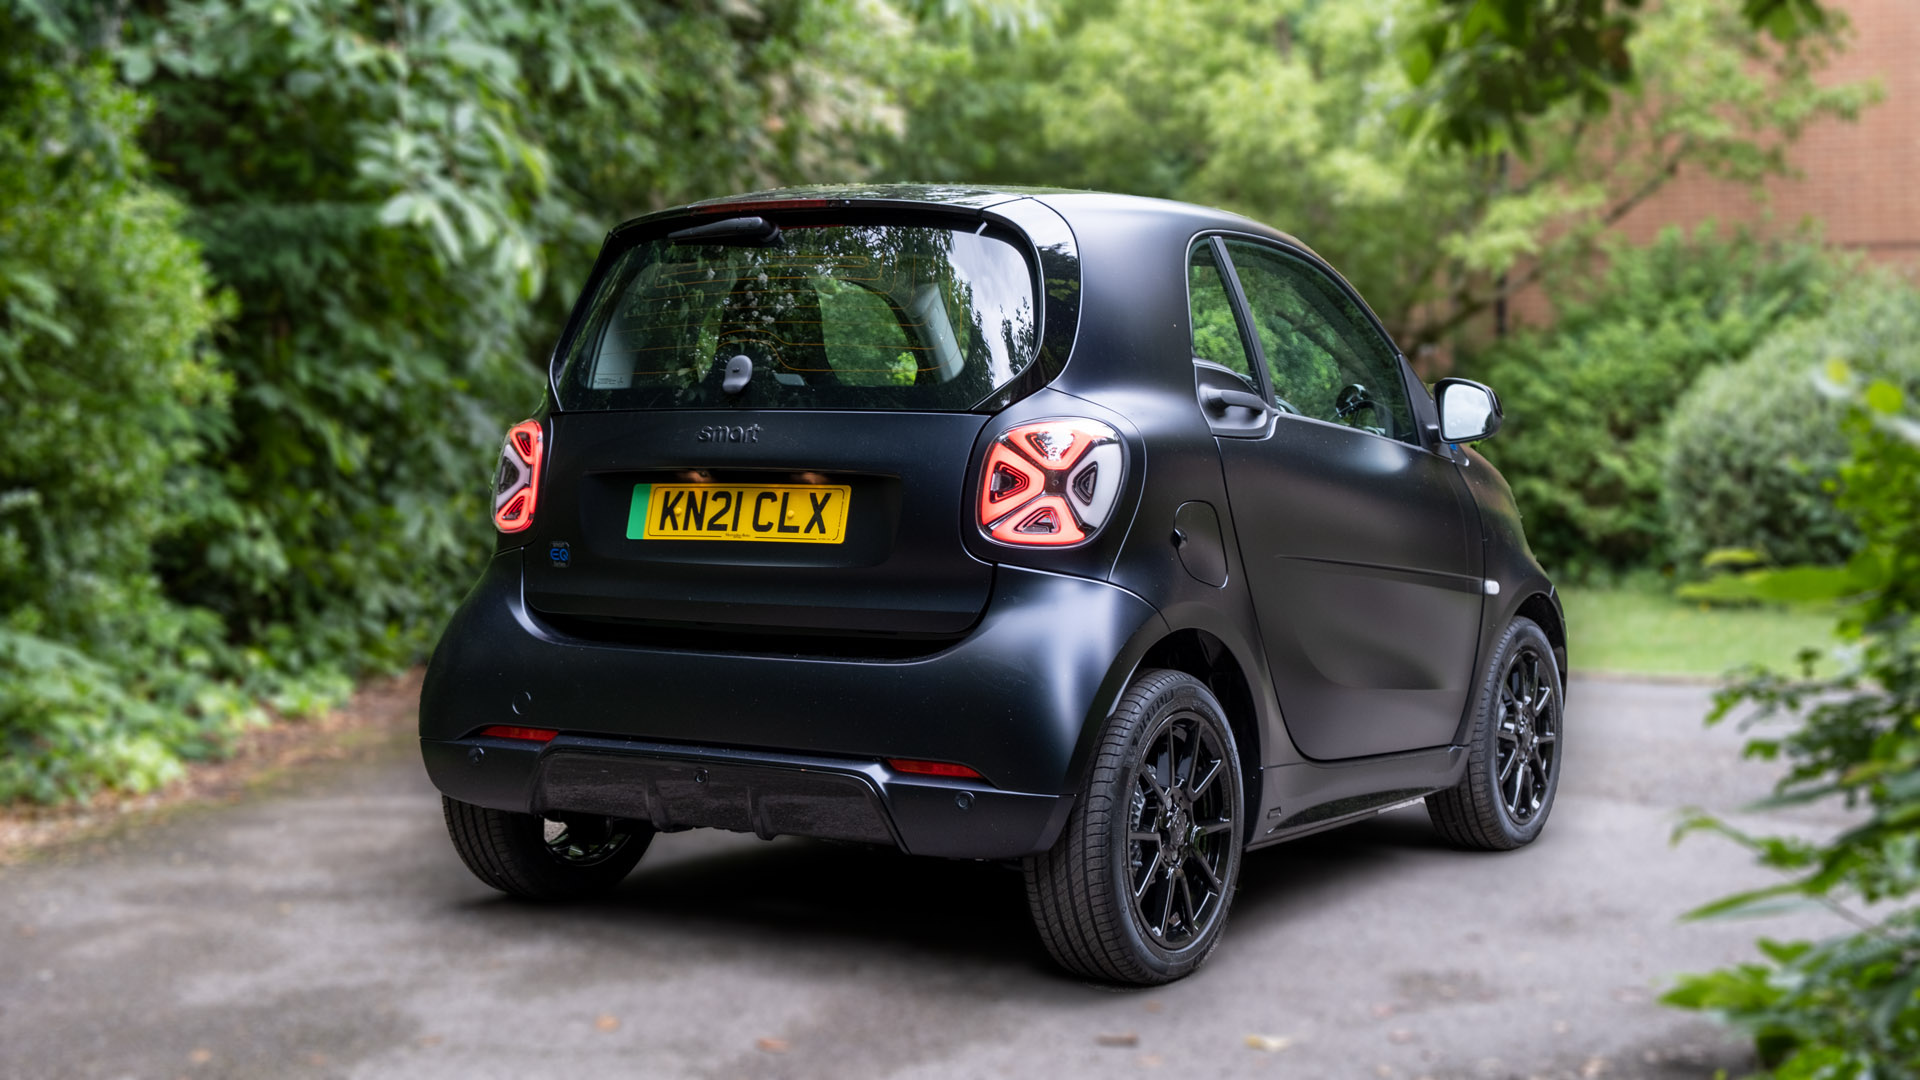 Smart EQ Fortwo audio review